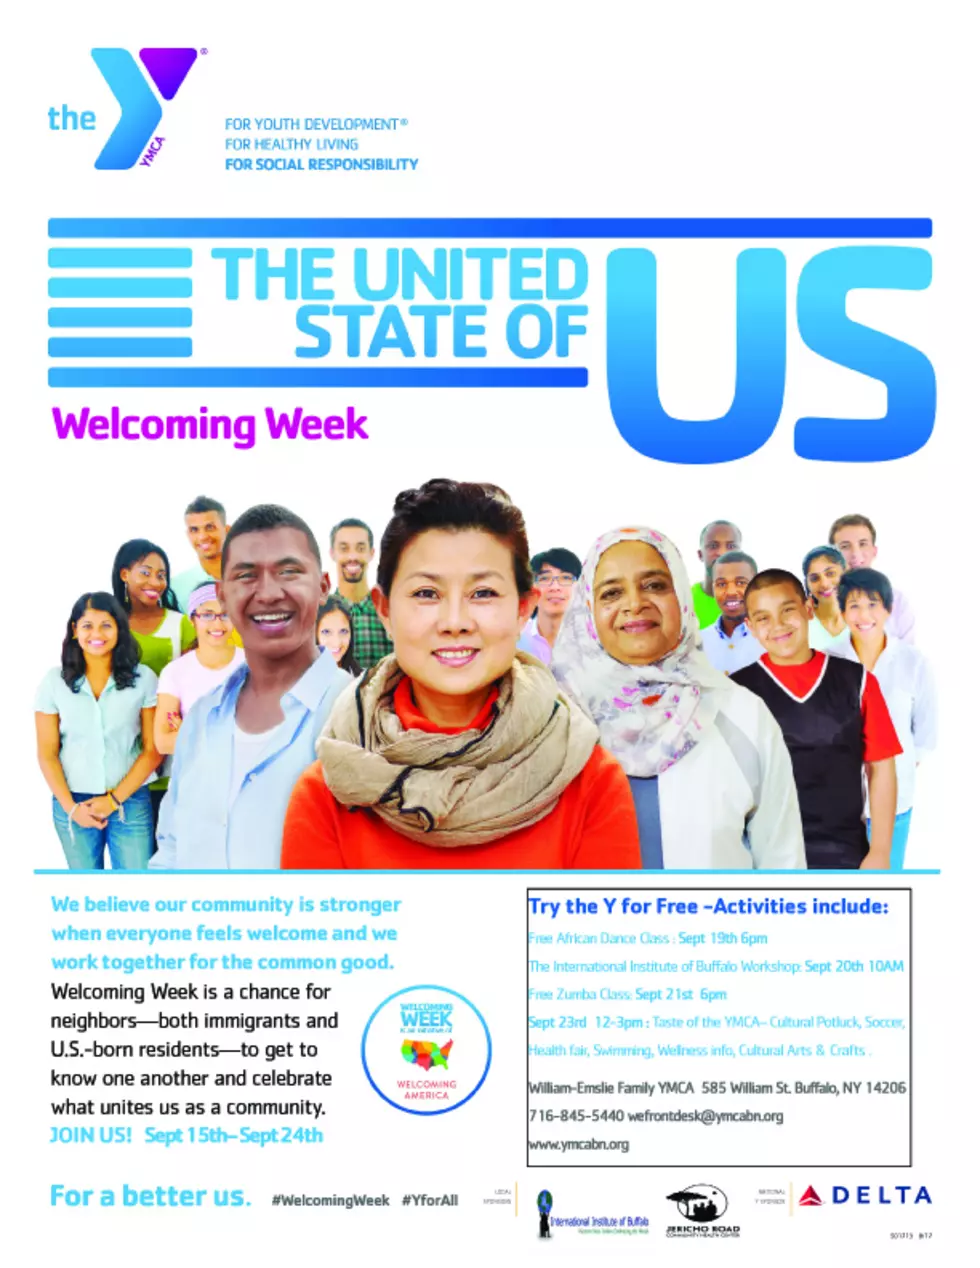 Community: Join the William-Emslie YMCA for ‘Welcoming Week’